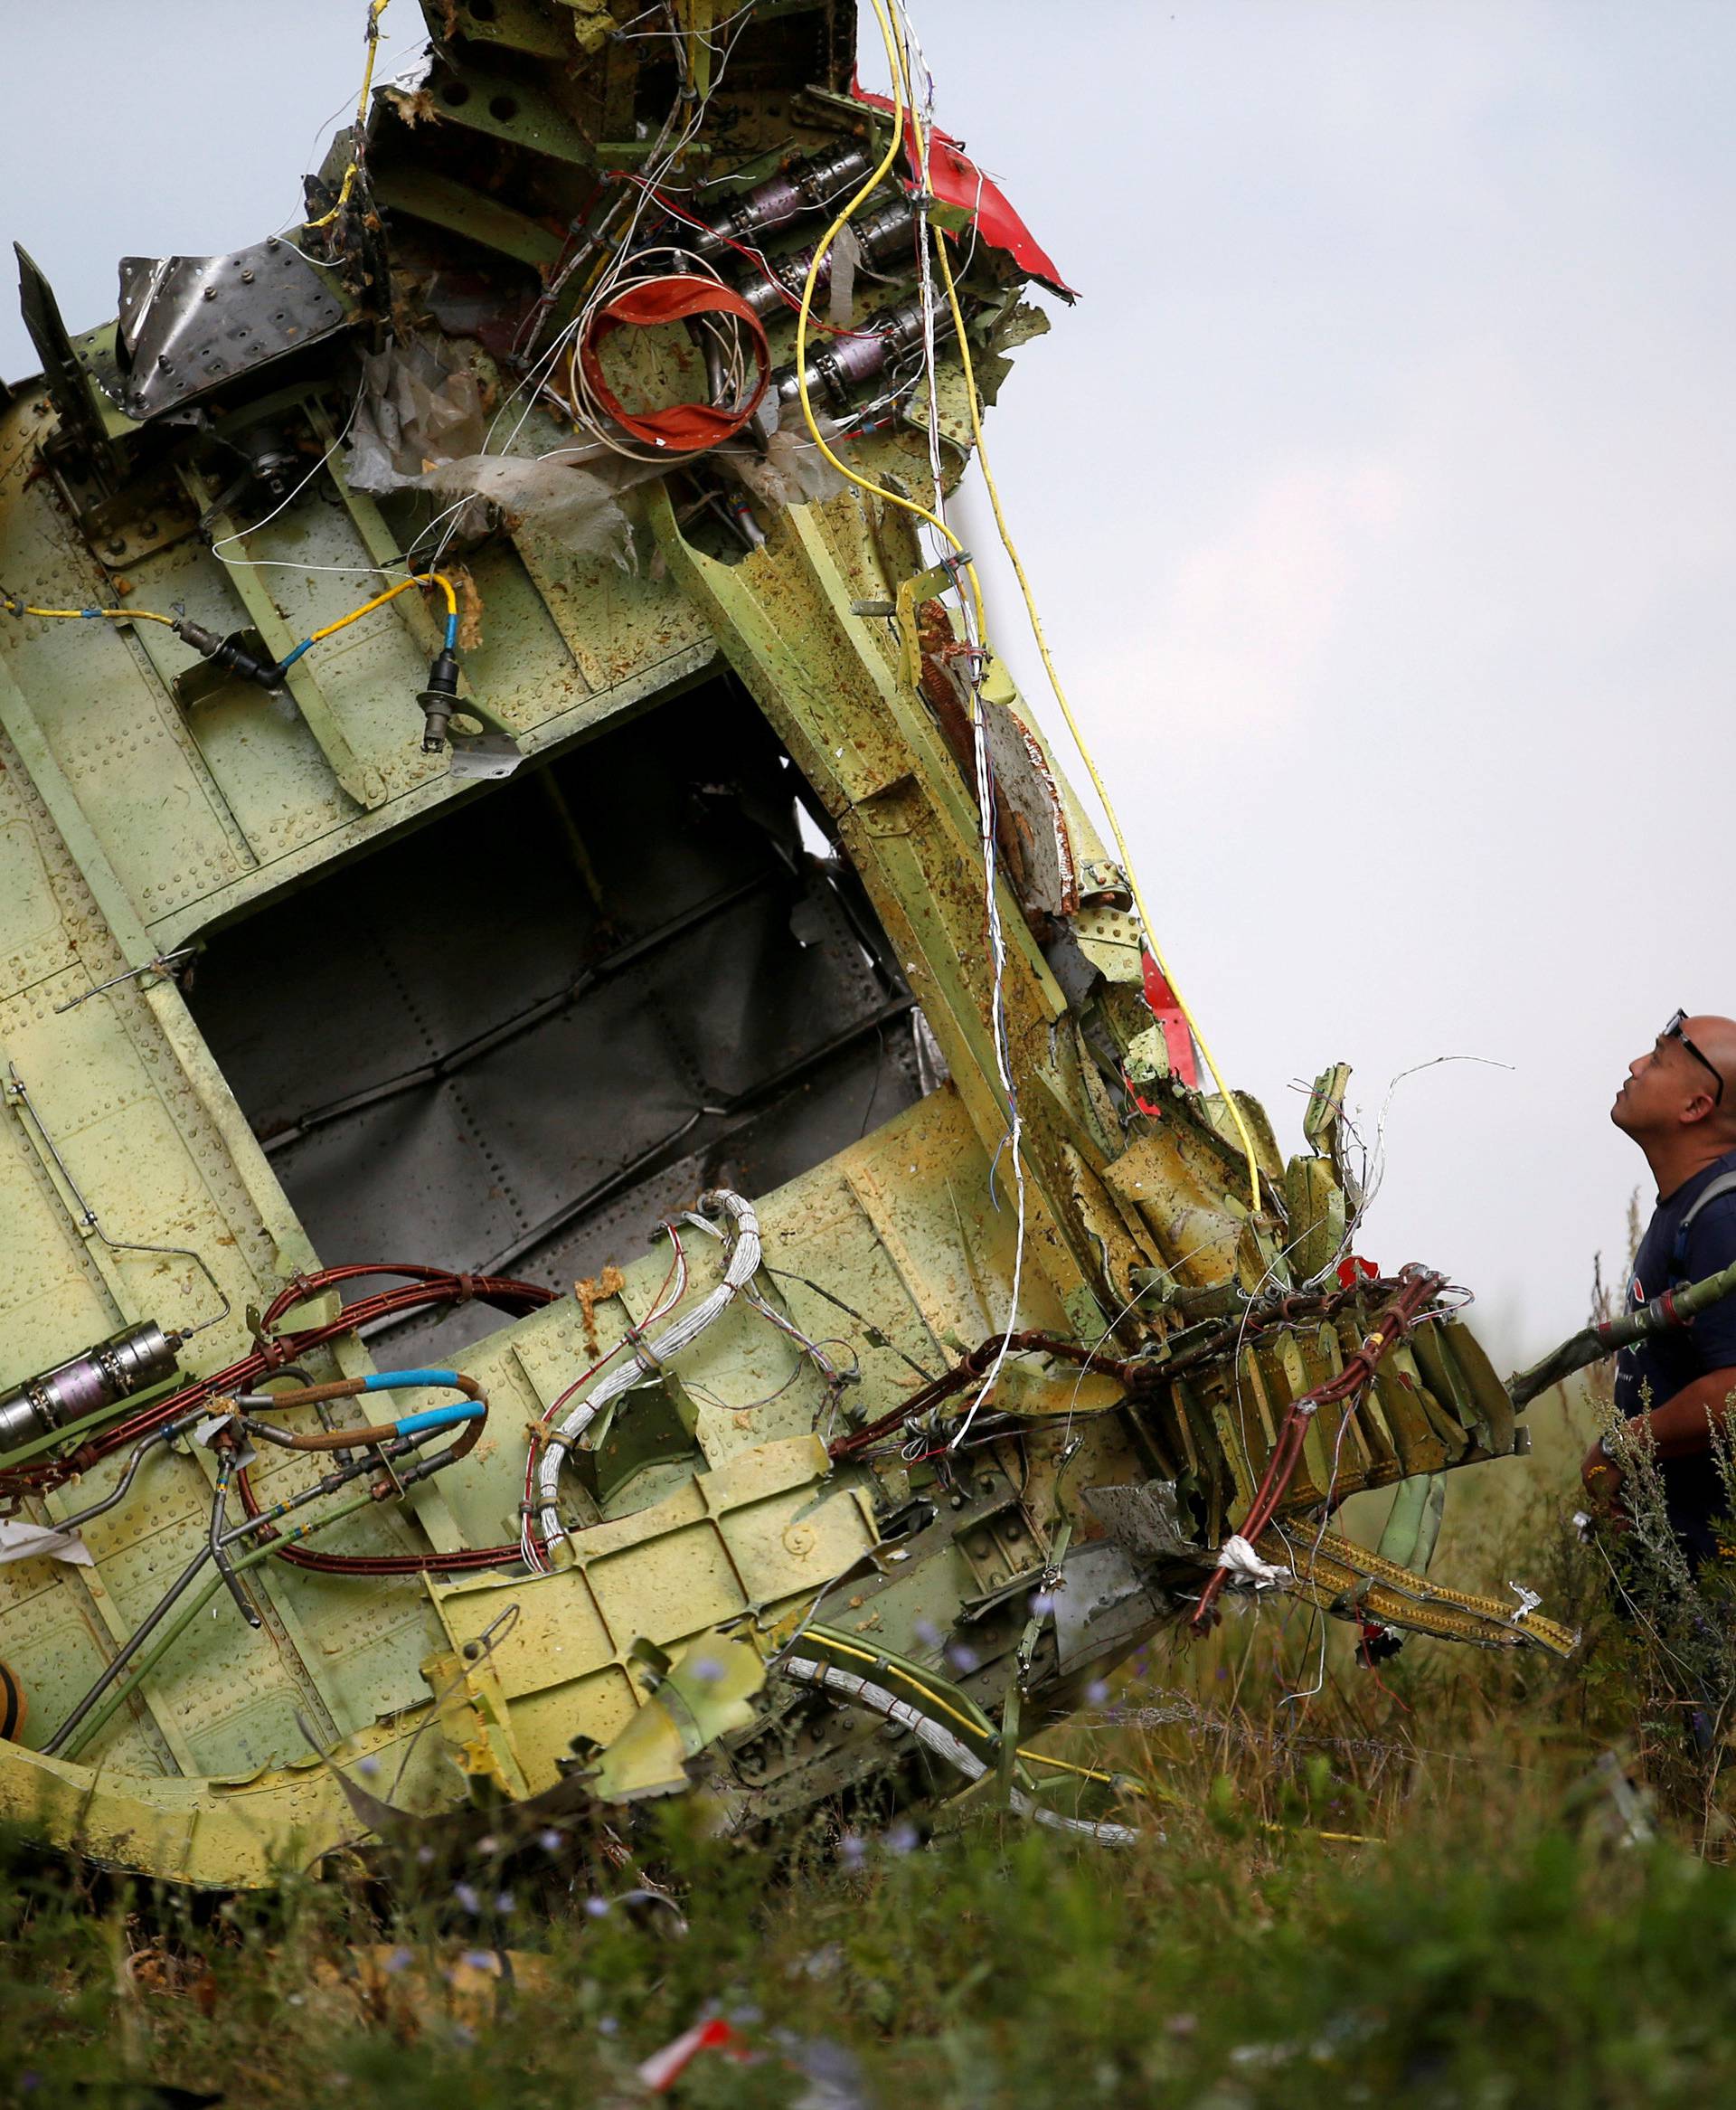 FILE PHOTO: A Malaysian air crash investigator inspects the crash site of Malaysia Airlines Flight MH17, near the village of Hrabove (Grabovo) in Donetsk region